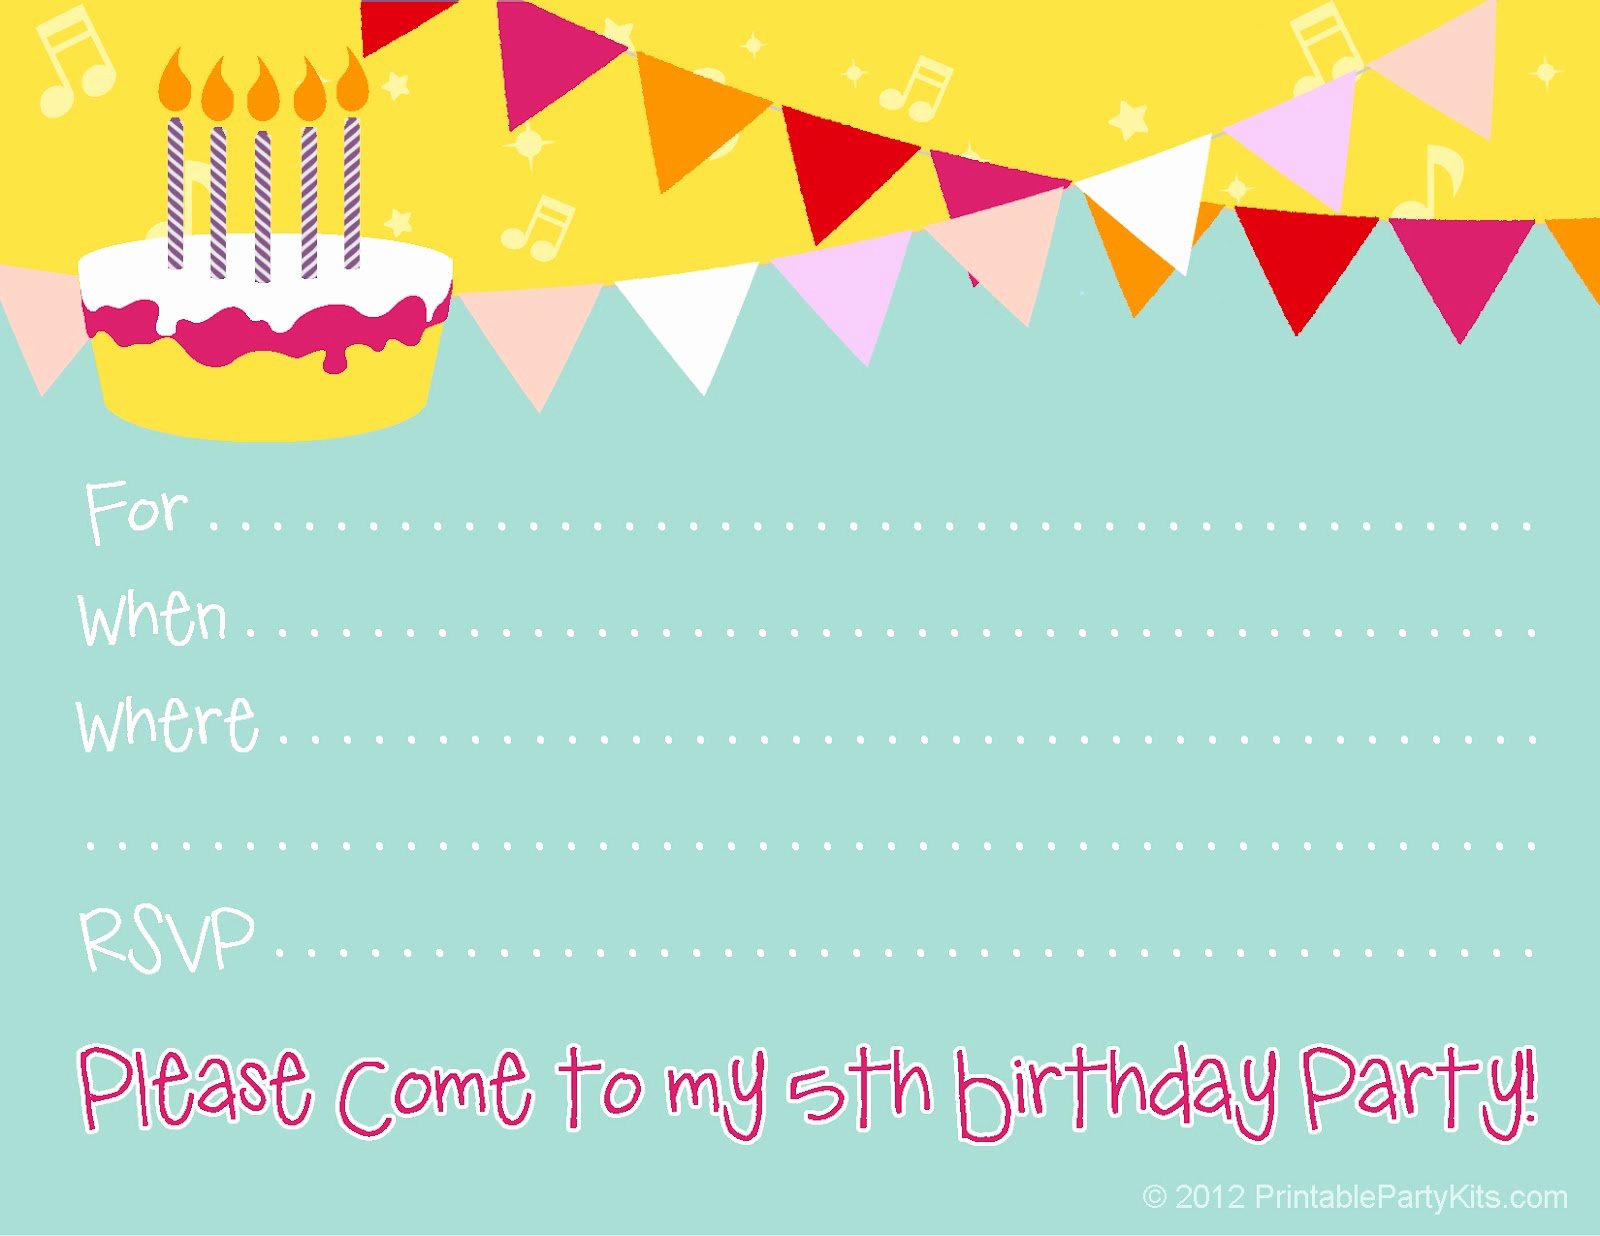 Free Party Invitation Templates Fresh Free Birthday Party Invitations for Girl – Free Printable